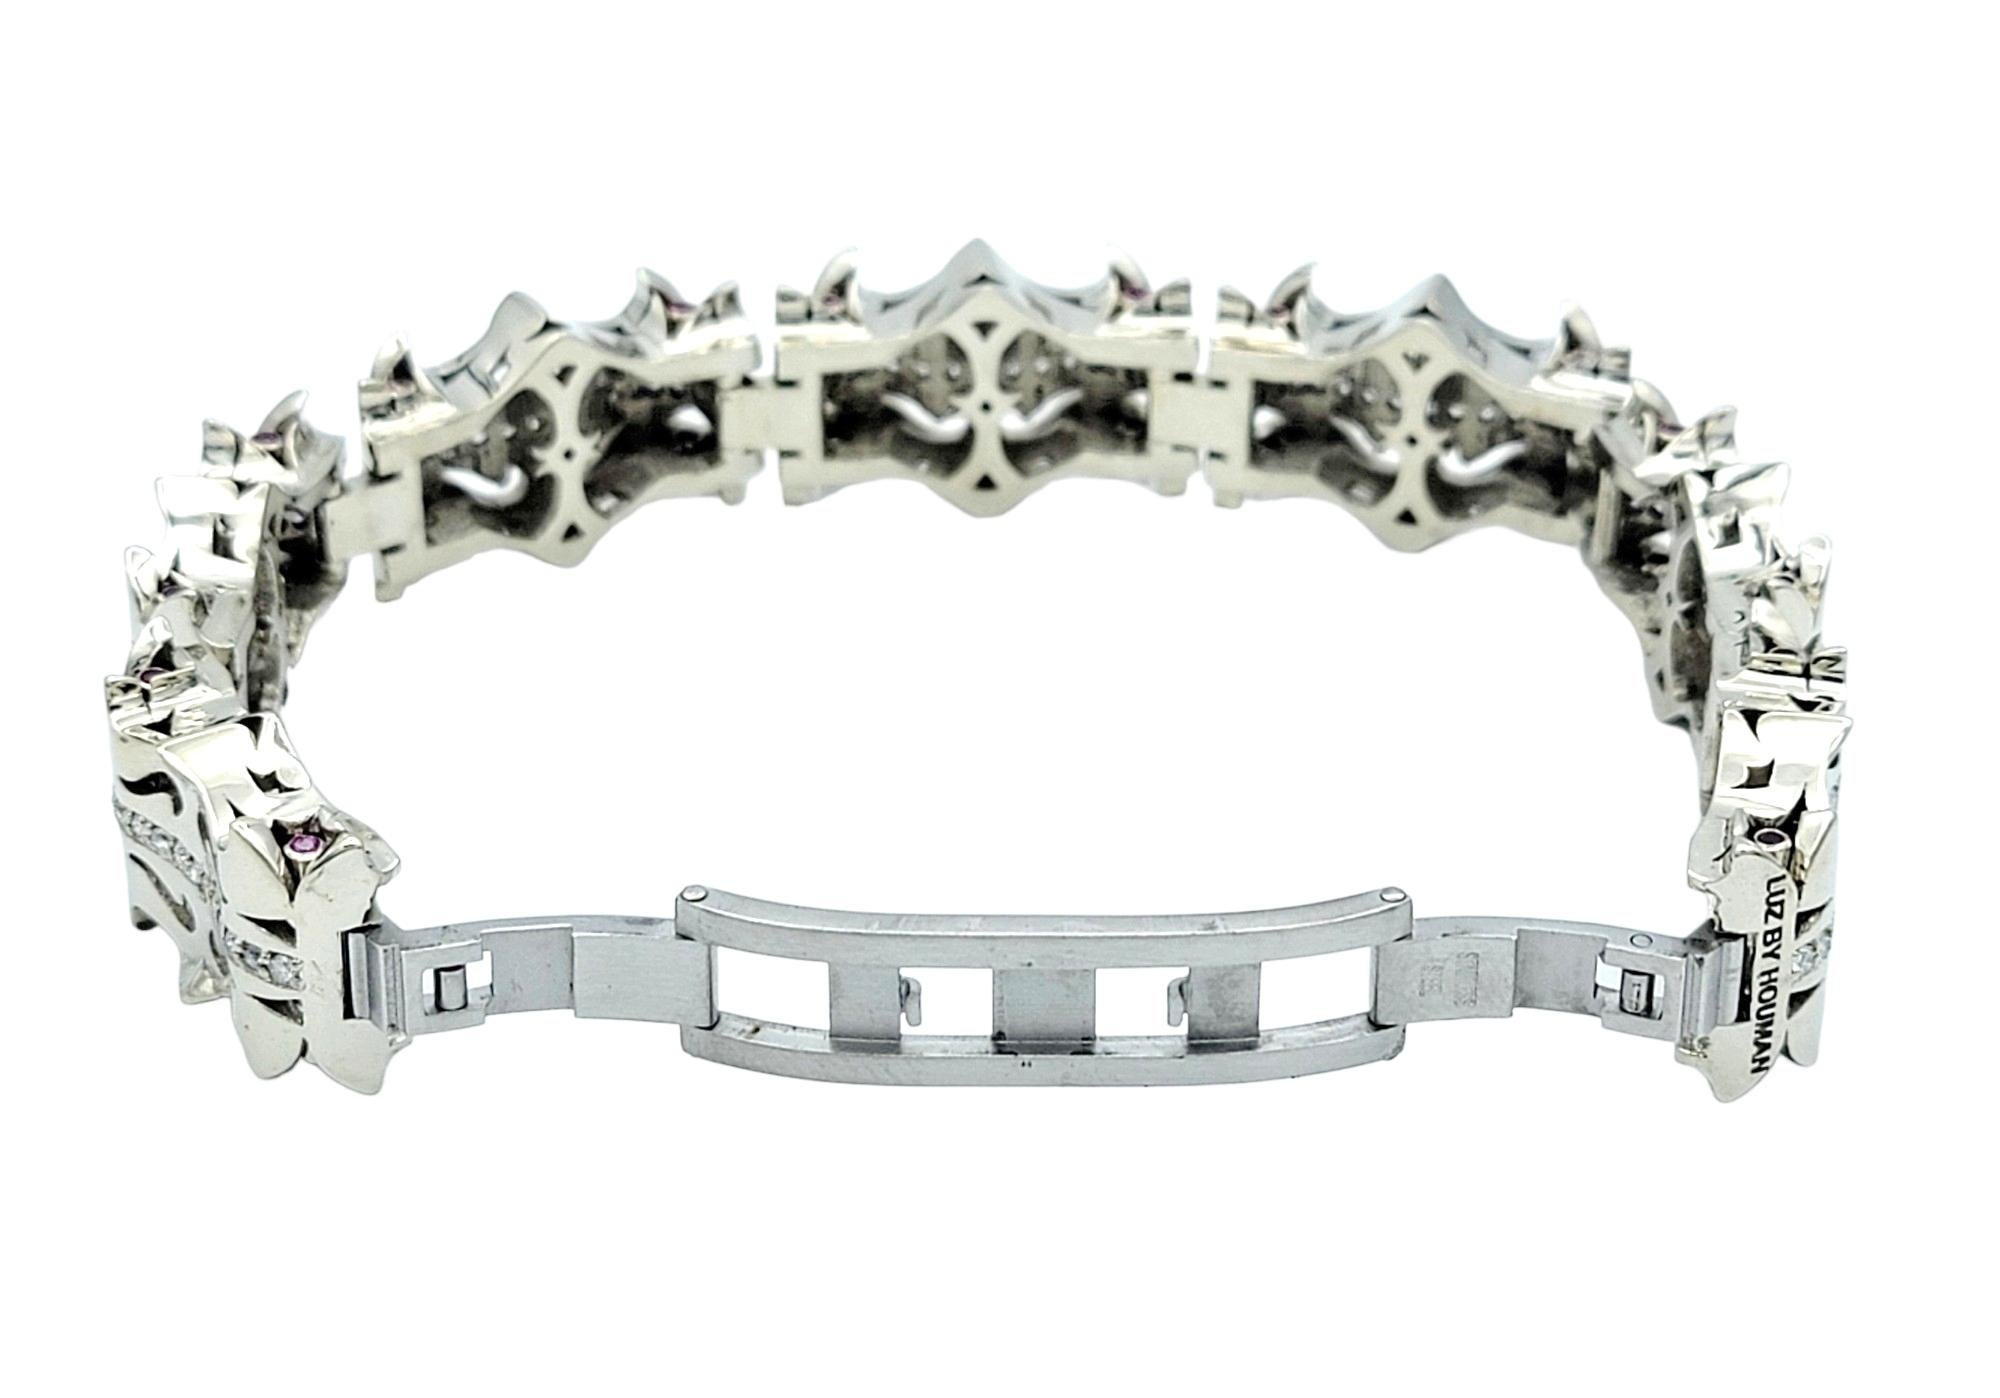 LUZ by Houman 18 Karat White Gold Chunky Link Bracelet with Diamonds and Rubies In Good Condition For Sale In Scottsdale, AZ